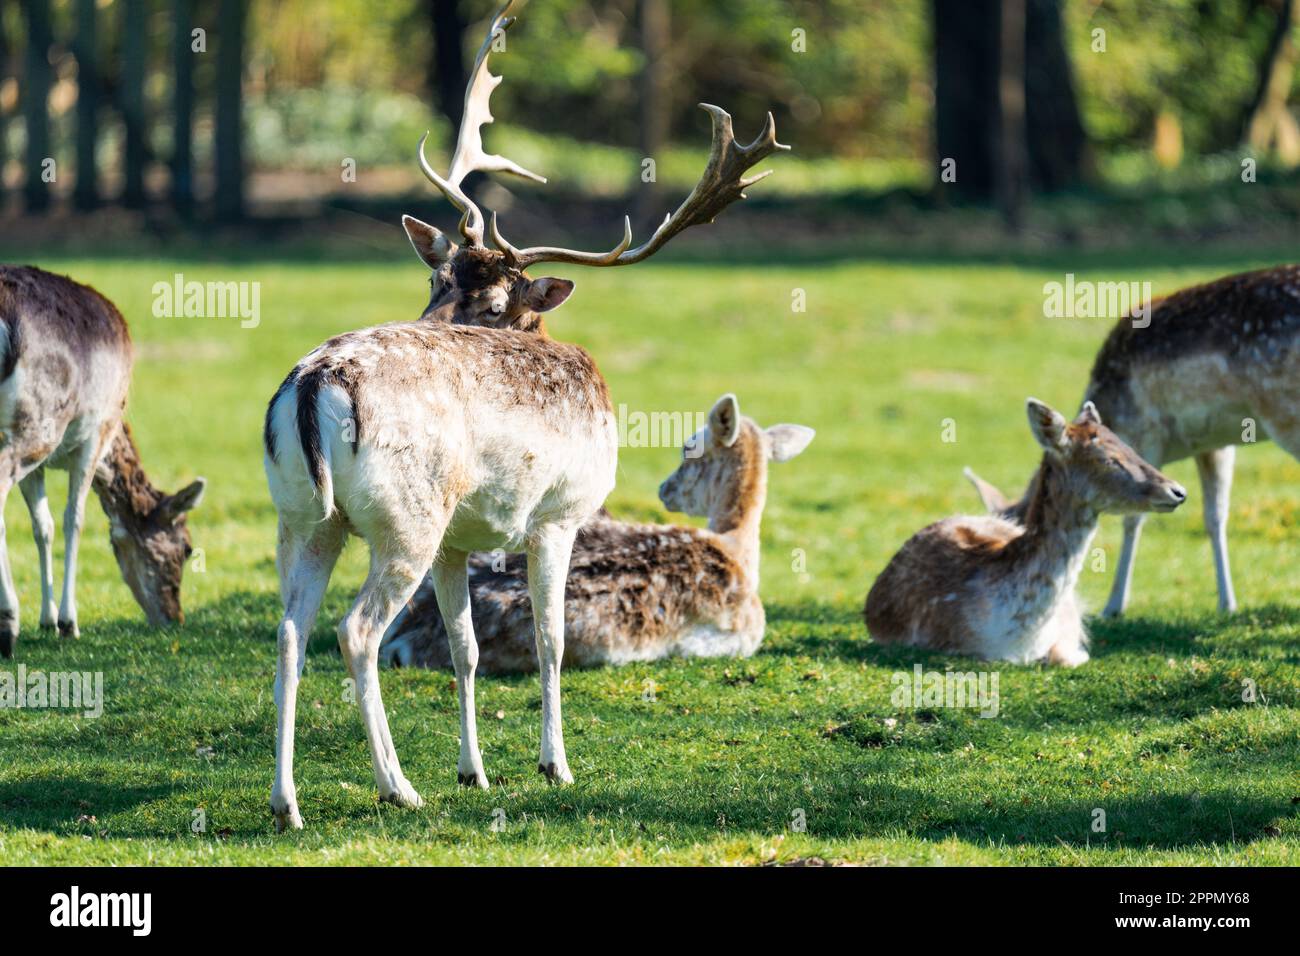 Male deer scratching his back while being surrounded by female deers Stock Photo